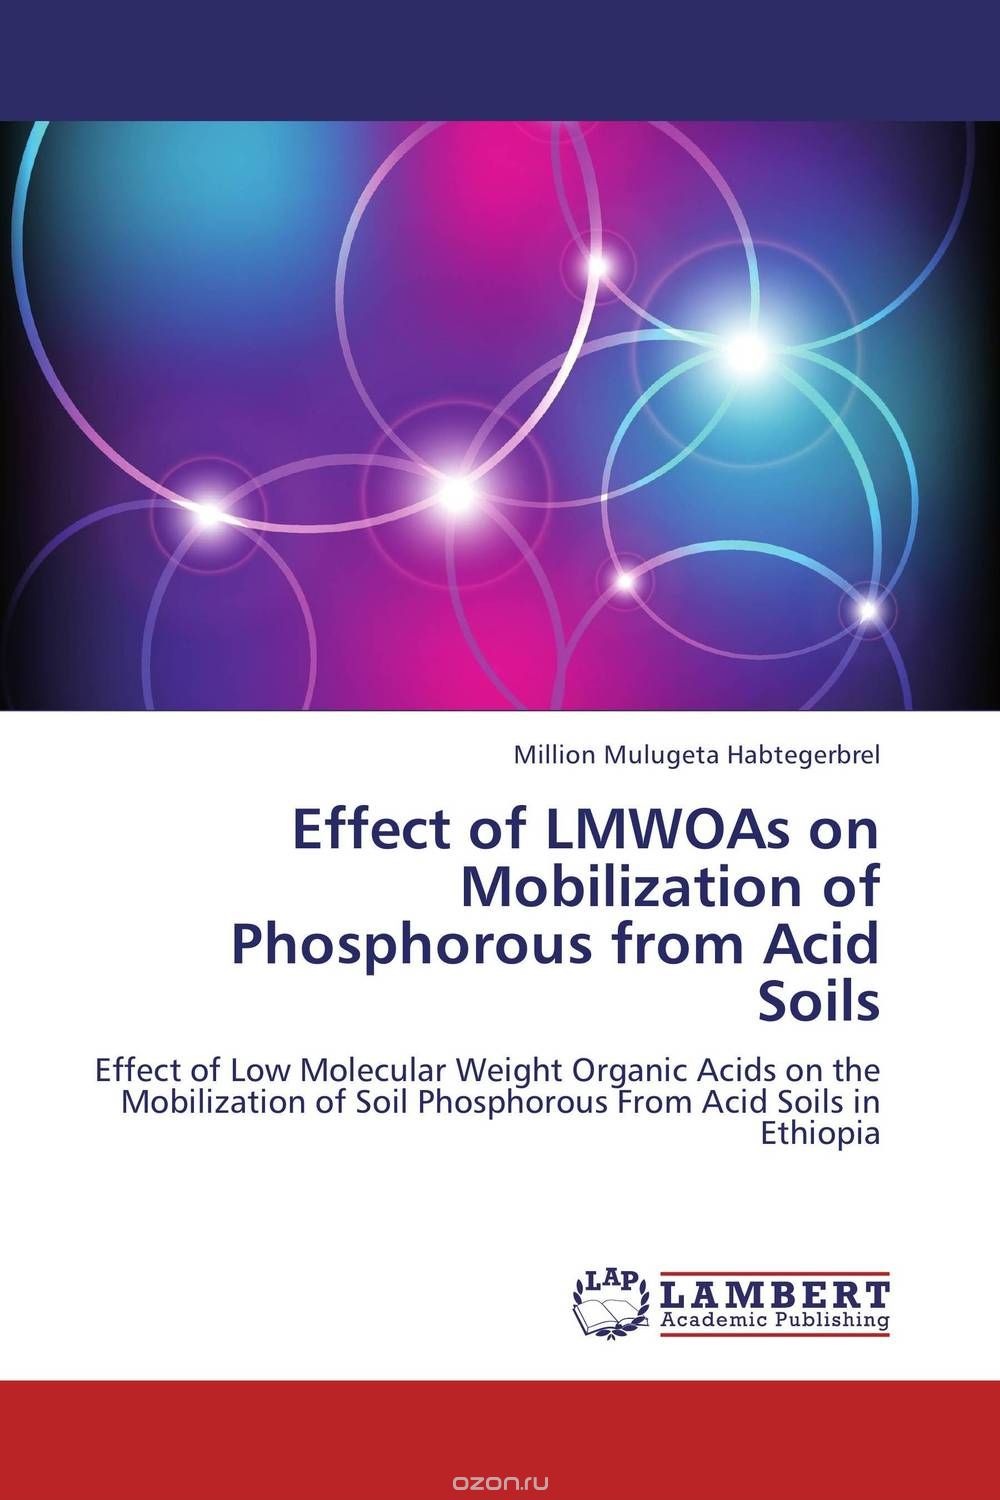 Effect of LMWOAs on Mobilization of Phosphorous from Acid Soils